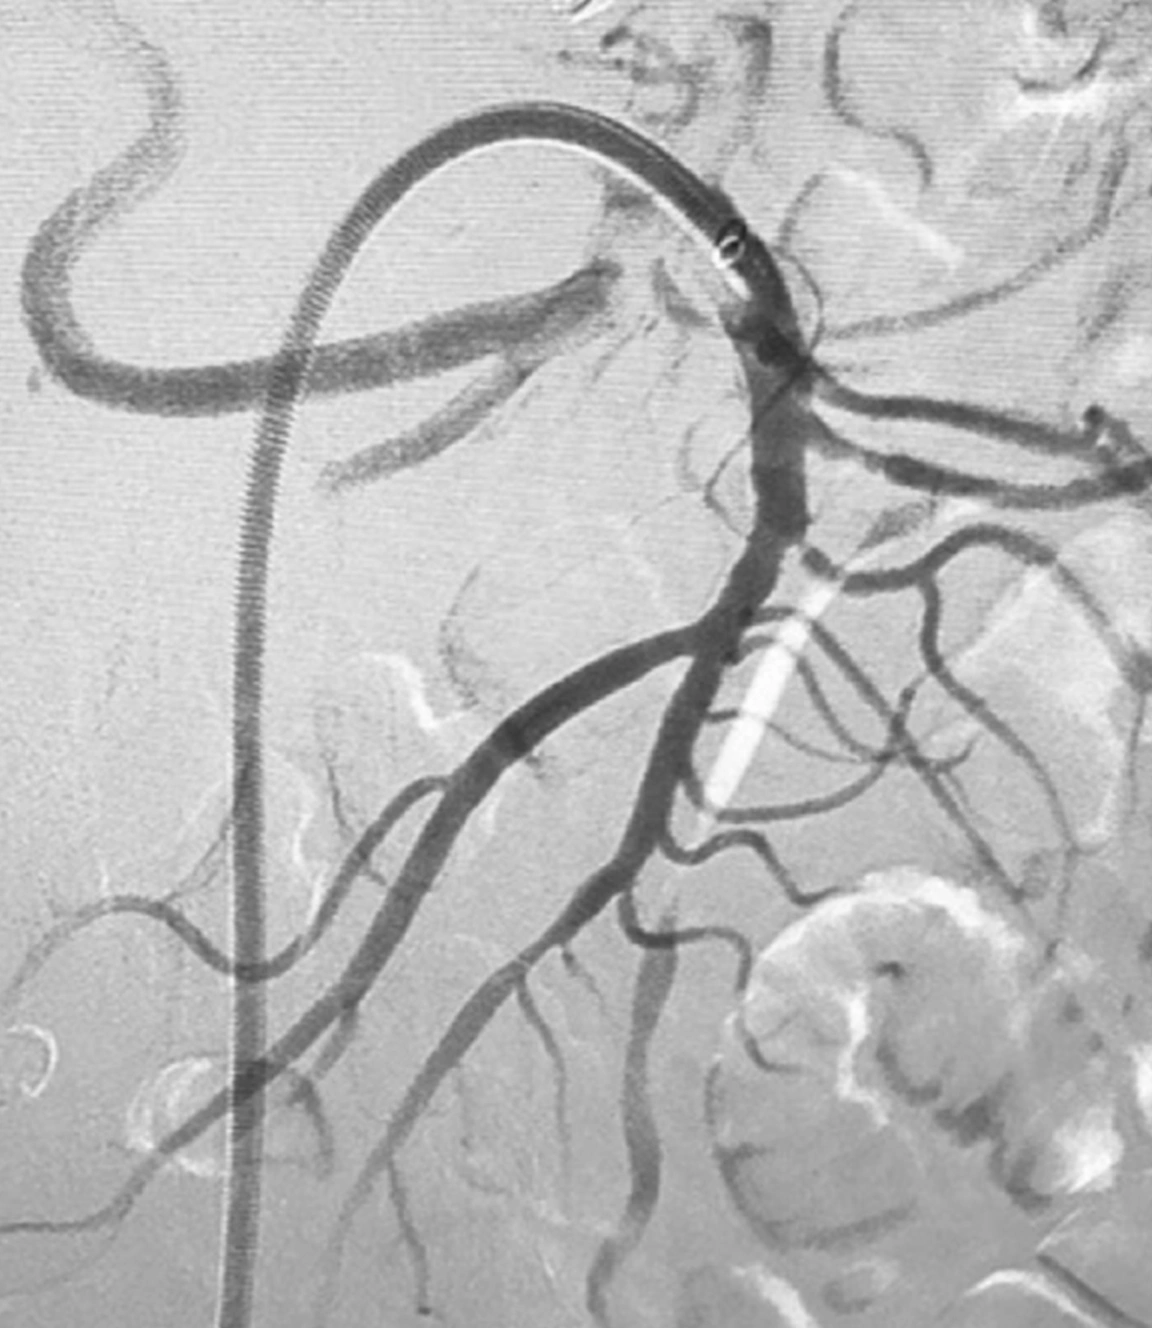 Angiogram of restored blood flow through SMA post computer-aided thrombectomy with Lightning 7